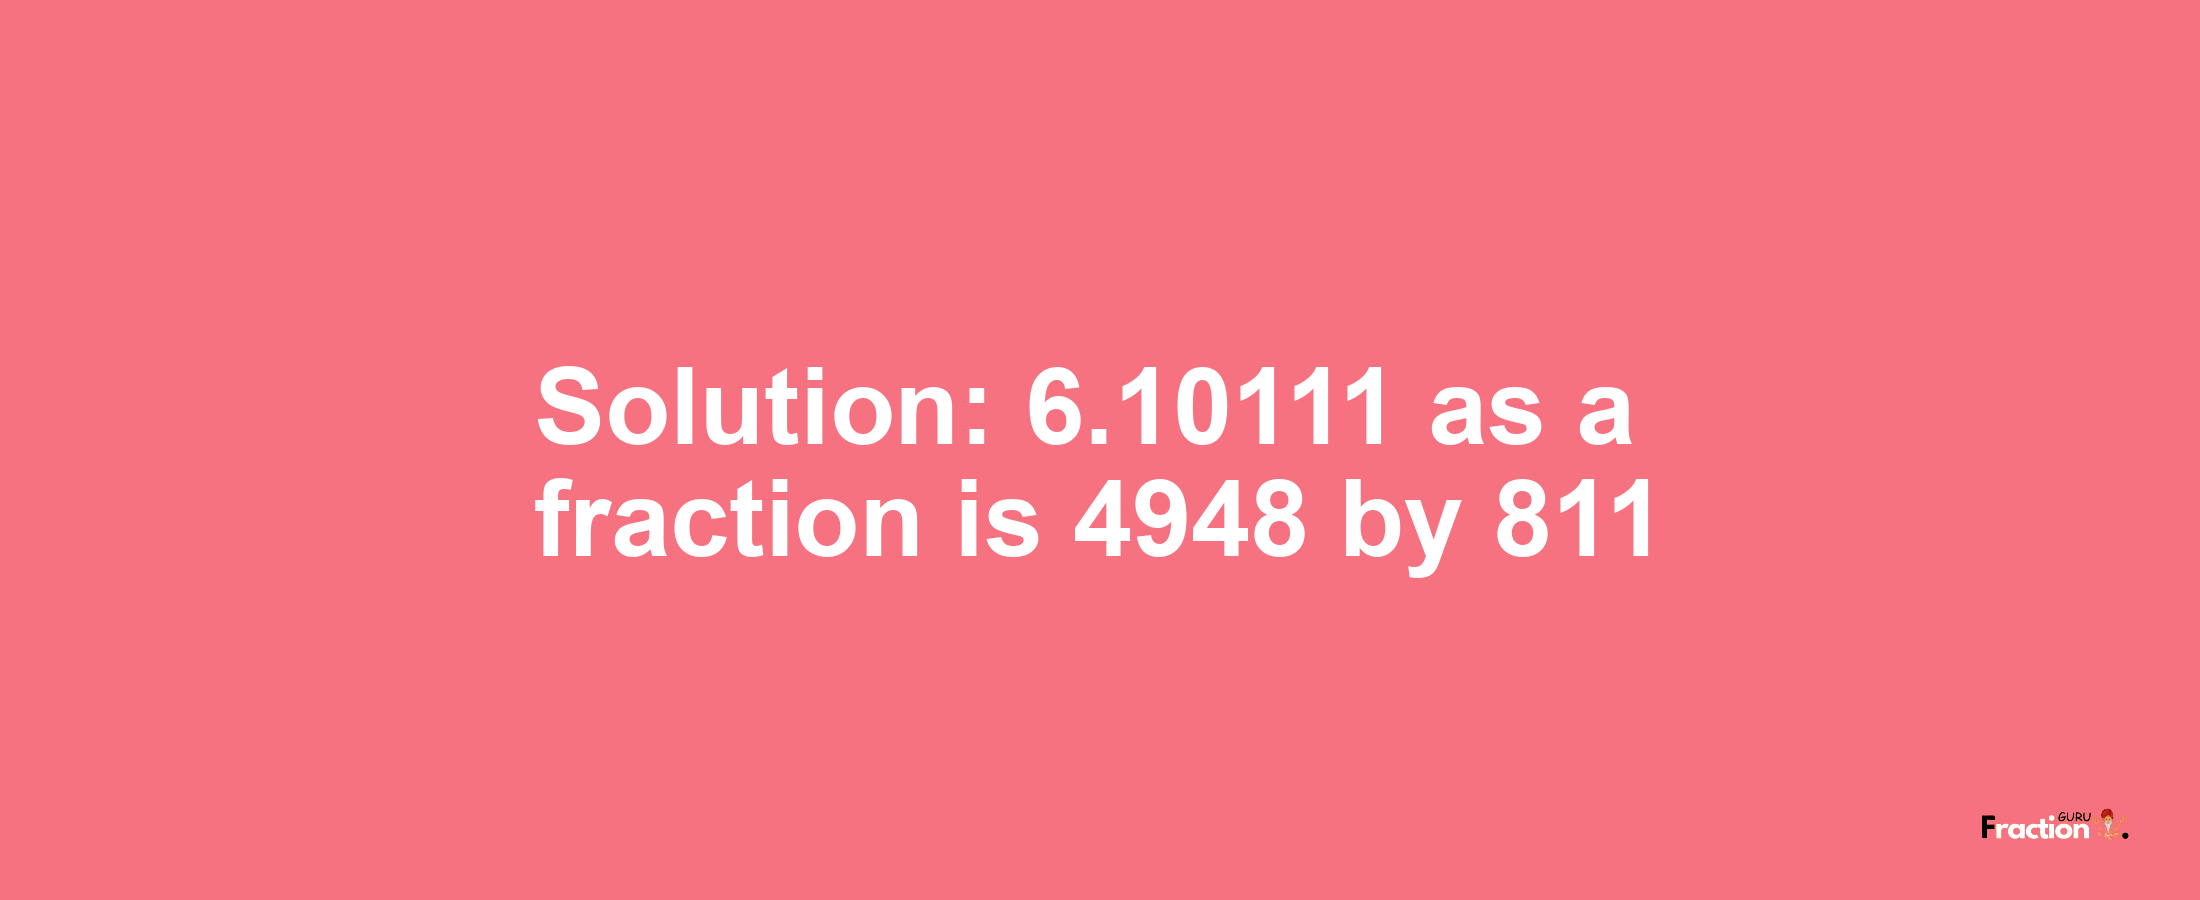 Solution:6.10111 as a fraction is 4948/811